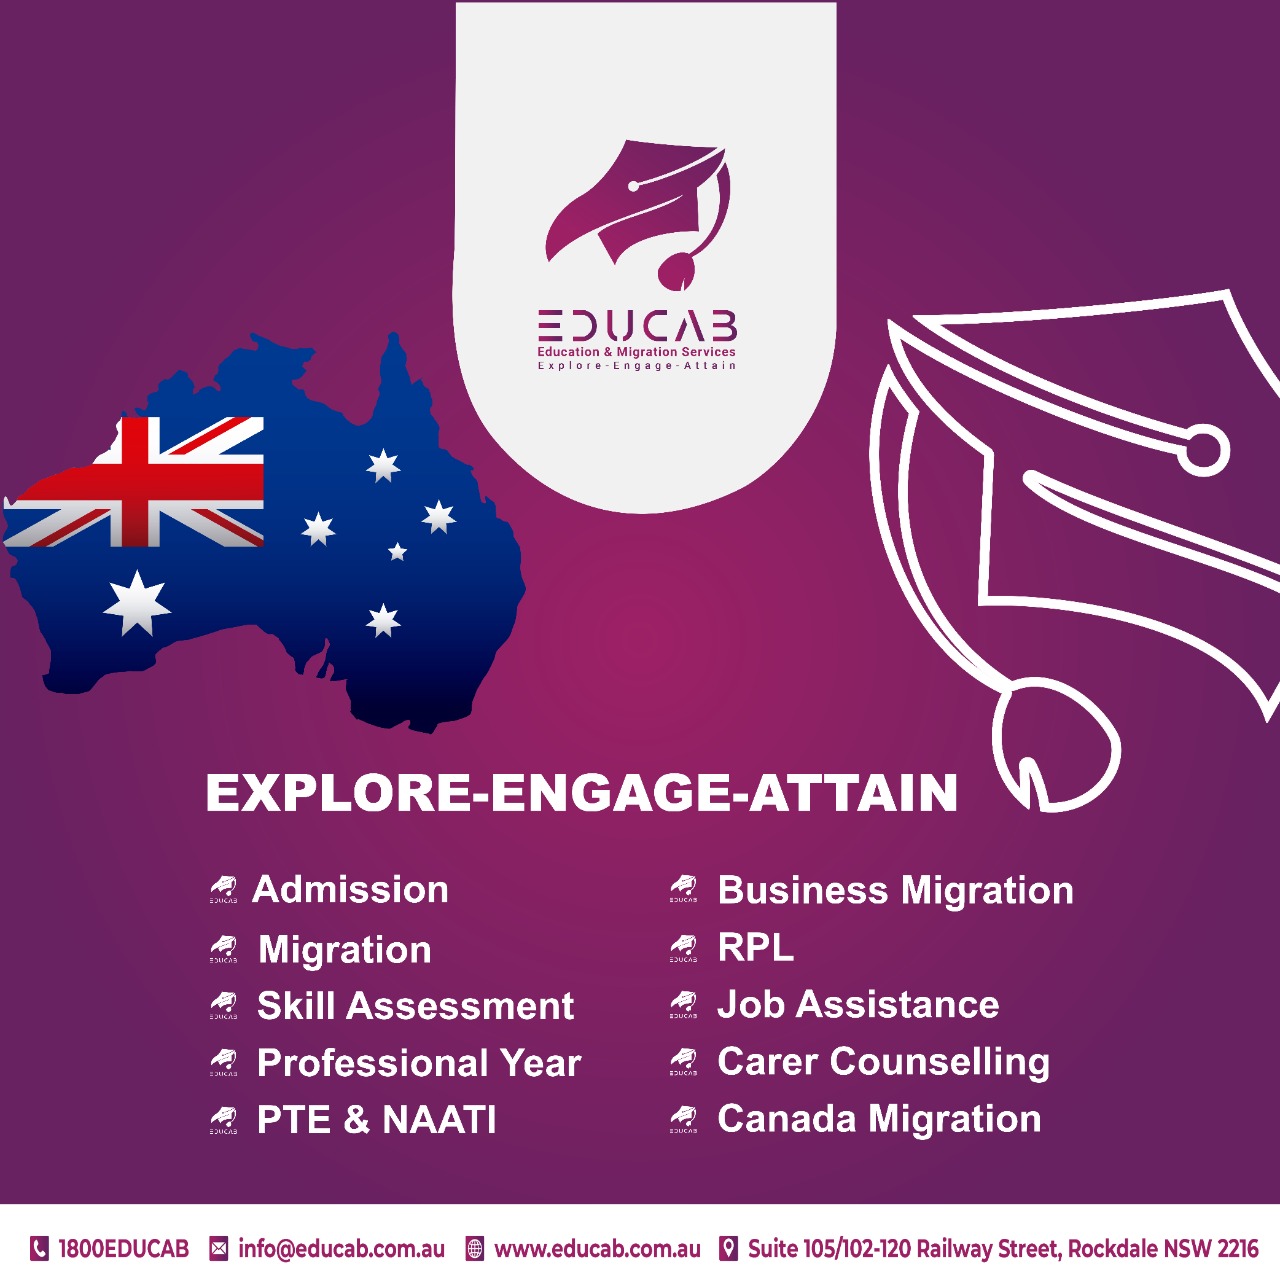 act

Z2UCA3

 

EXPLORE-ENGAGE-ATTAIN

# Admission # Business Migration
# Migration cll {oS

# Skill Assessment # Job Assistance

# Professional Year # Carer Counselling
“ PTE & NAATI # Canada Migration

 

1800EDUCAB [ info@educab.com.au [EB www.educab.com.au [J Suite 105/102-120 Railway Street, Rockdale NSW 2216